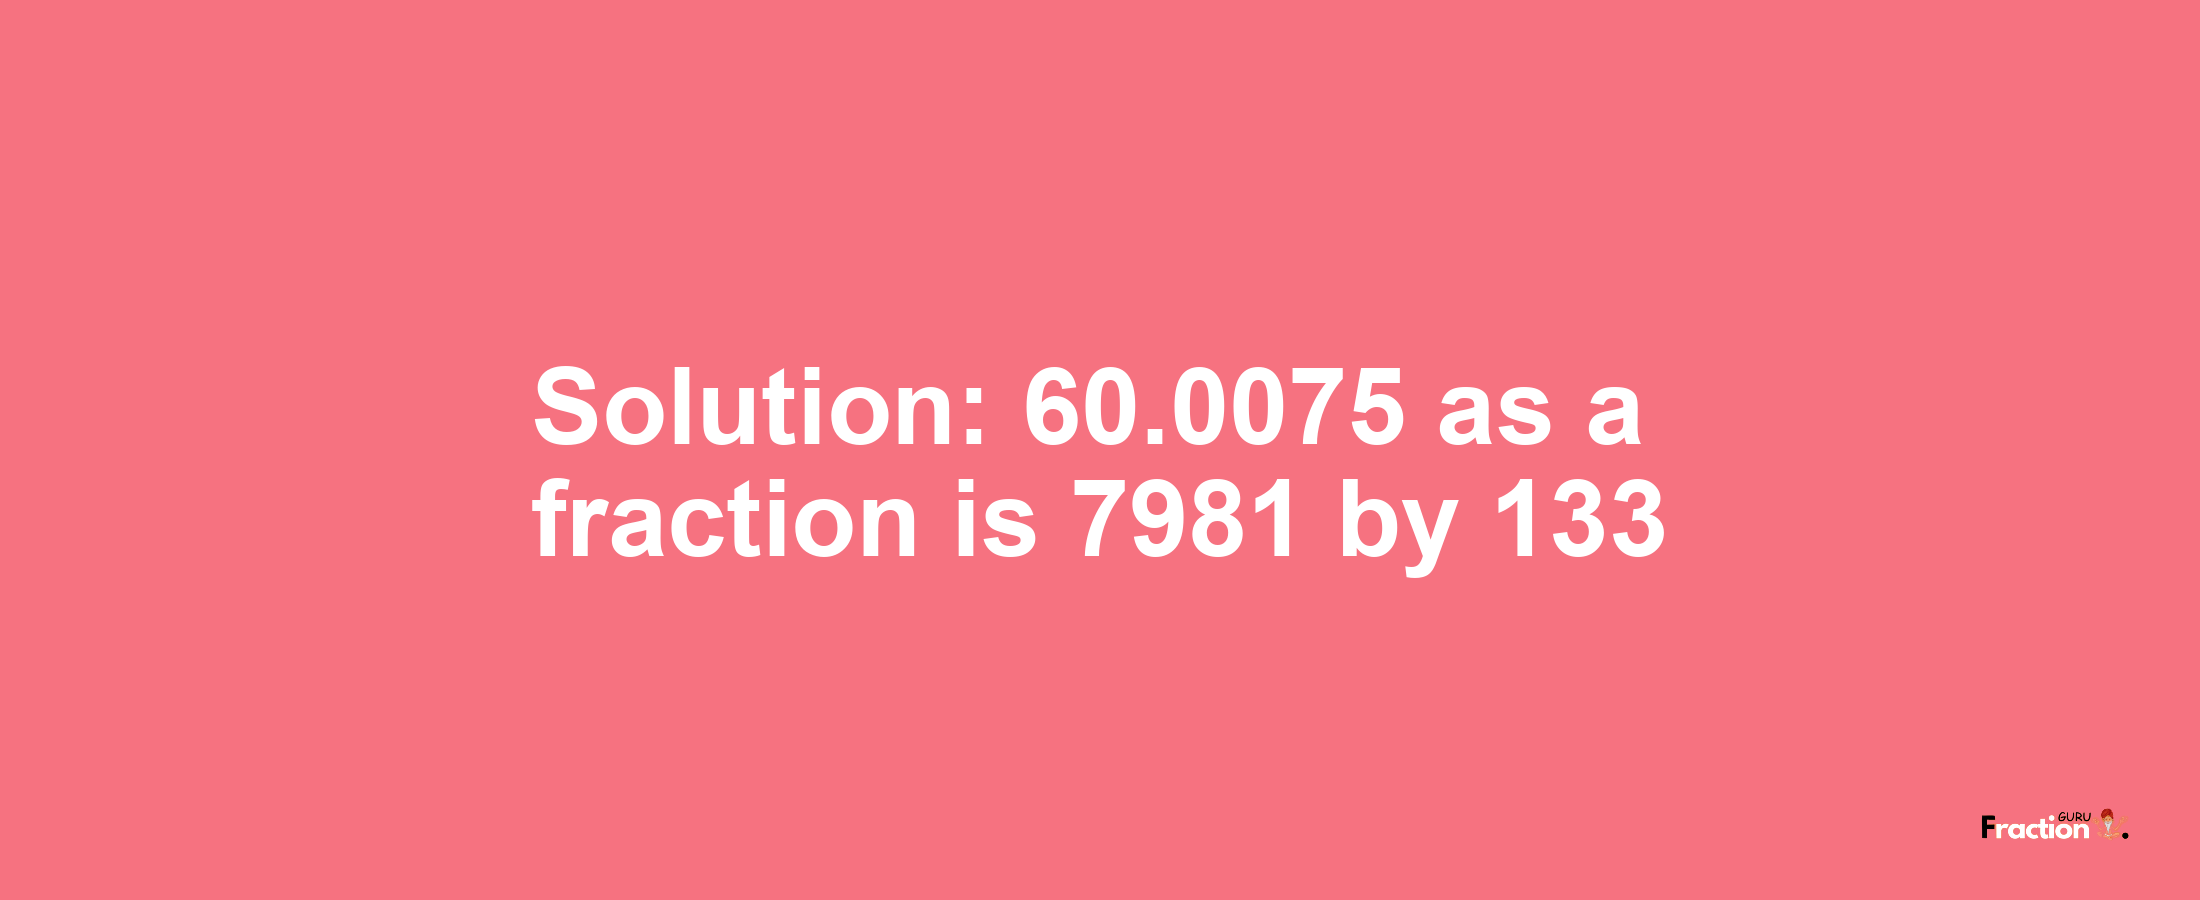 Solution:60.0075 as a fraction is 7981/133